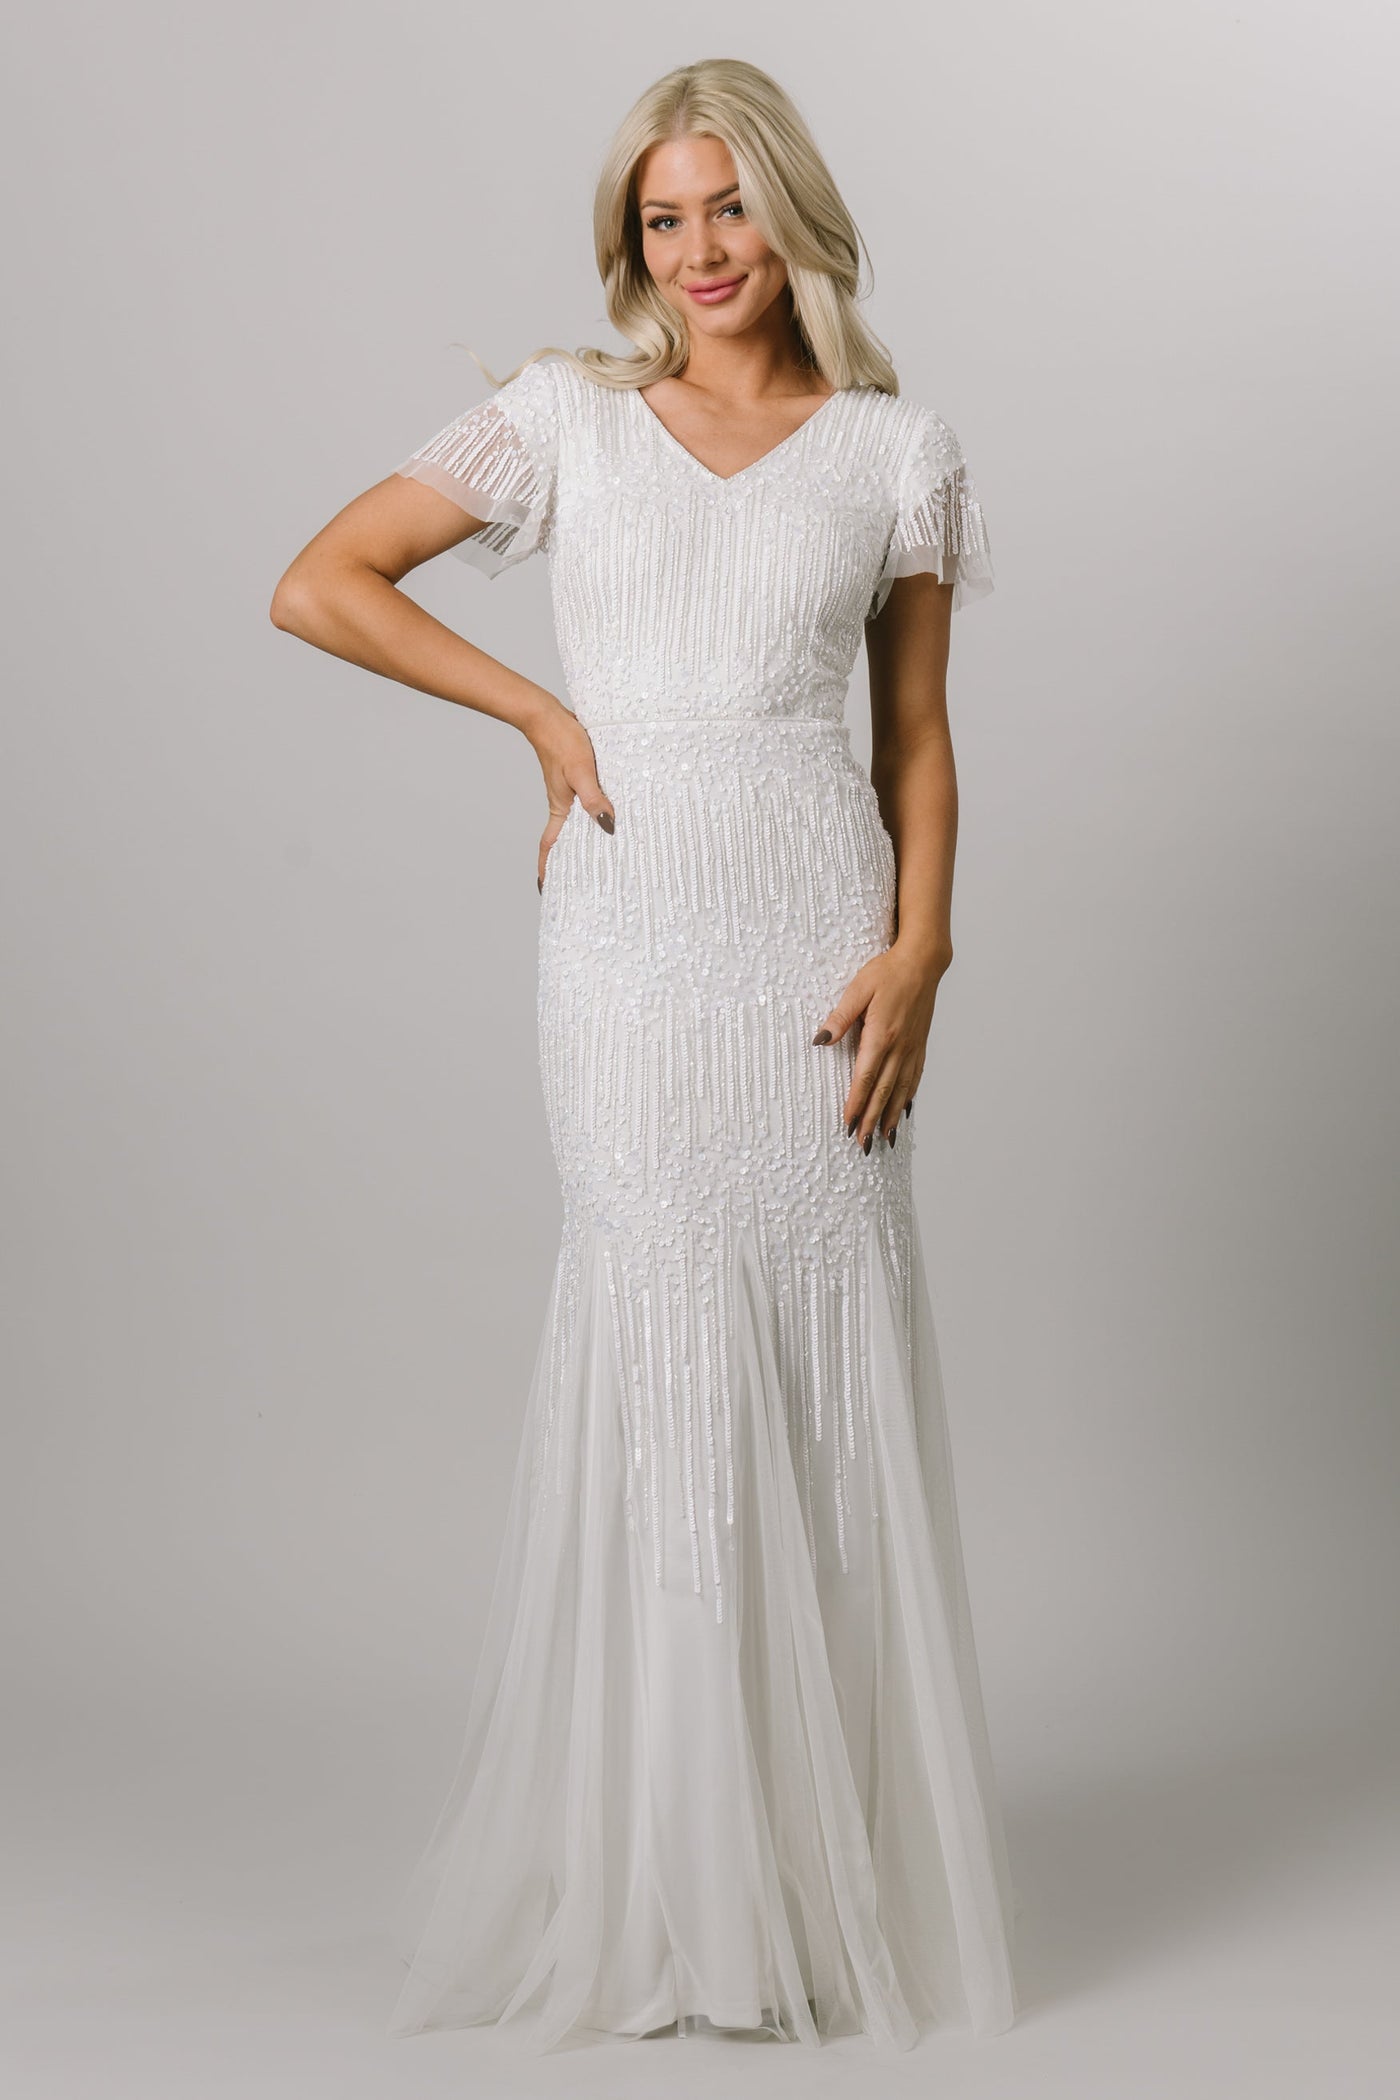 Modest wedding dress with flutter sleeves and v-neckline. It is a fitted dress with sequin beading. This Moments Made Bridal dress is stunning on any body type.